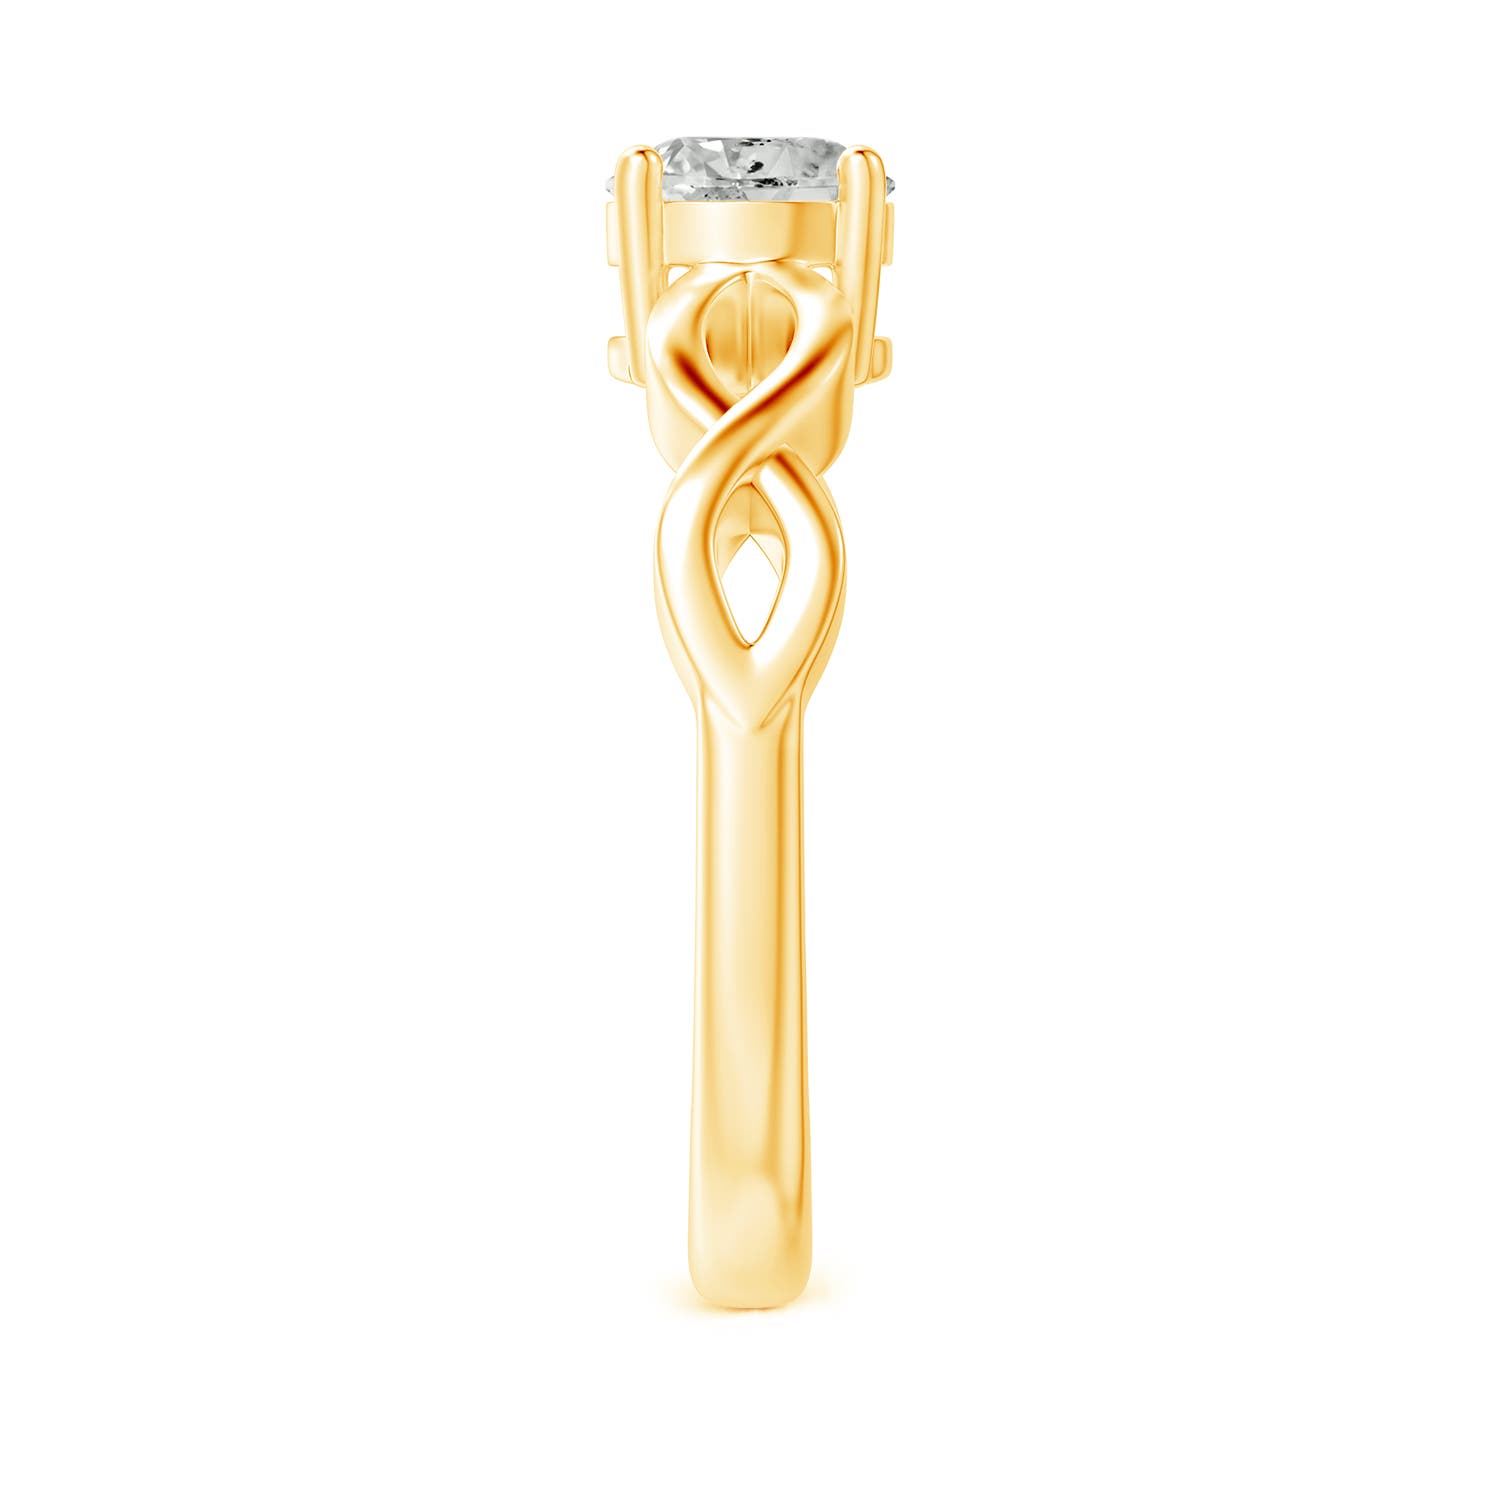 K, I3 / 0.8 CT / 14 KT Yellow Gold